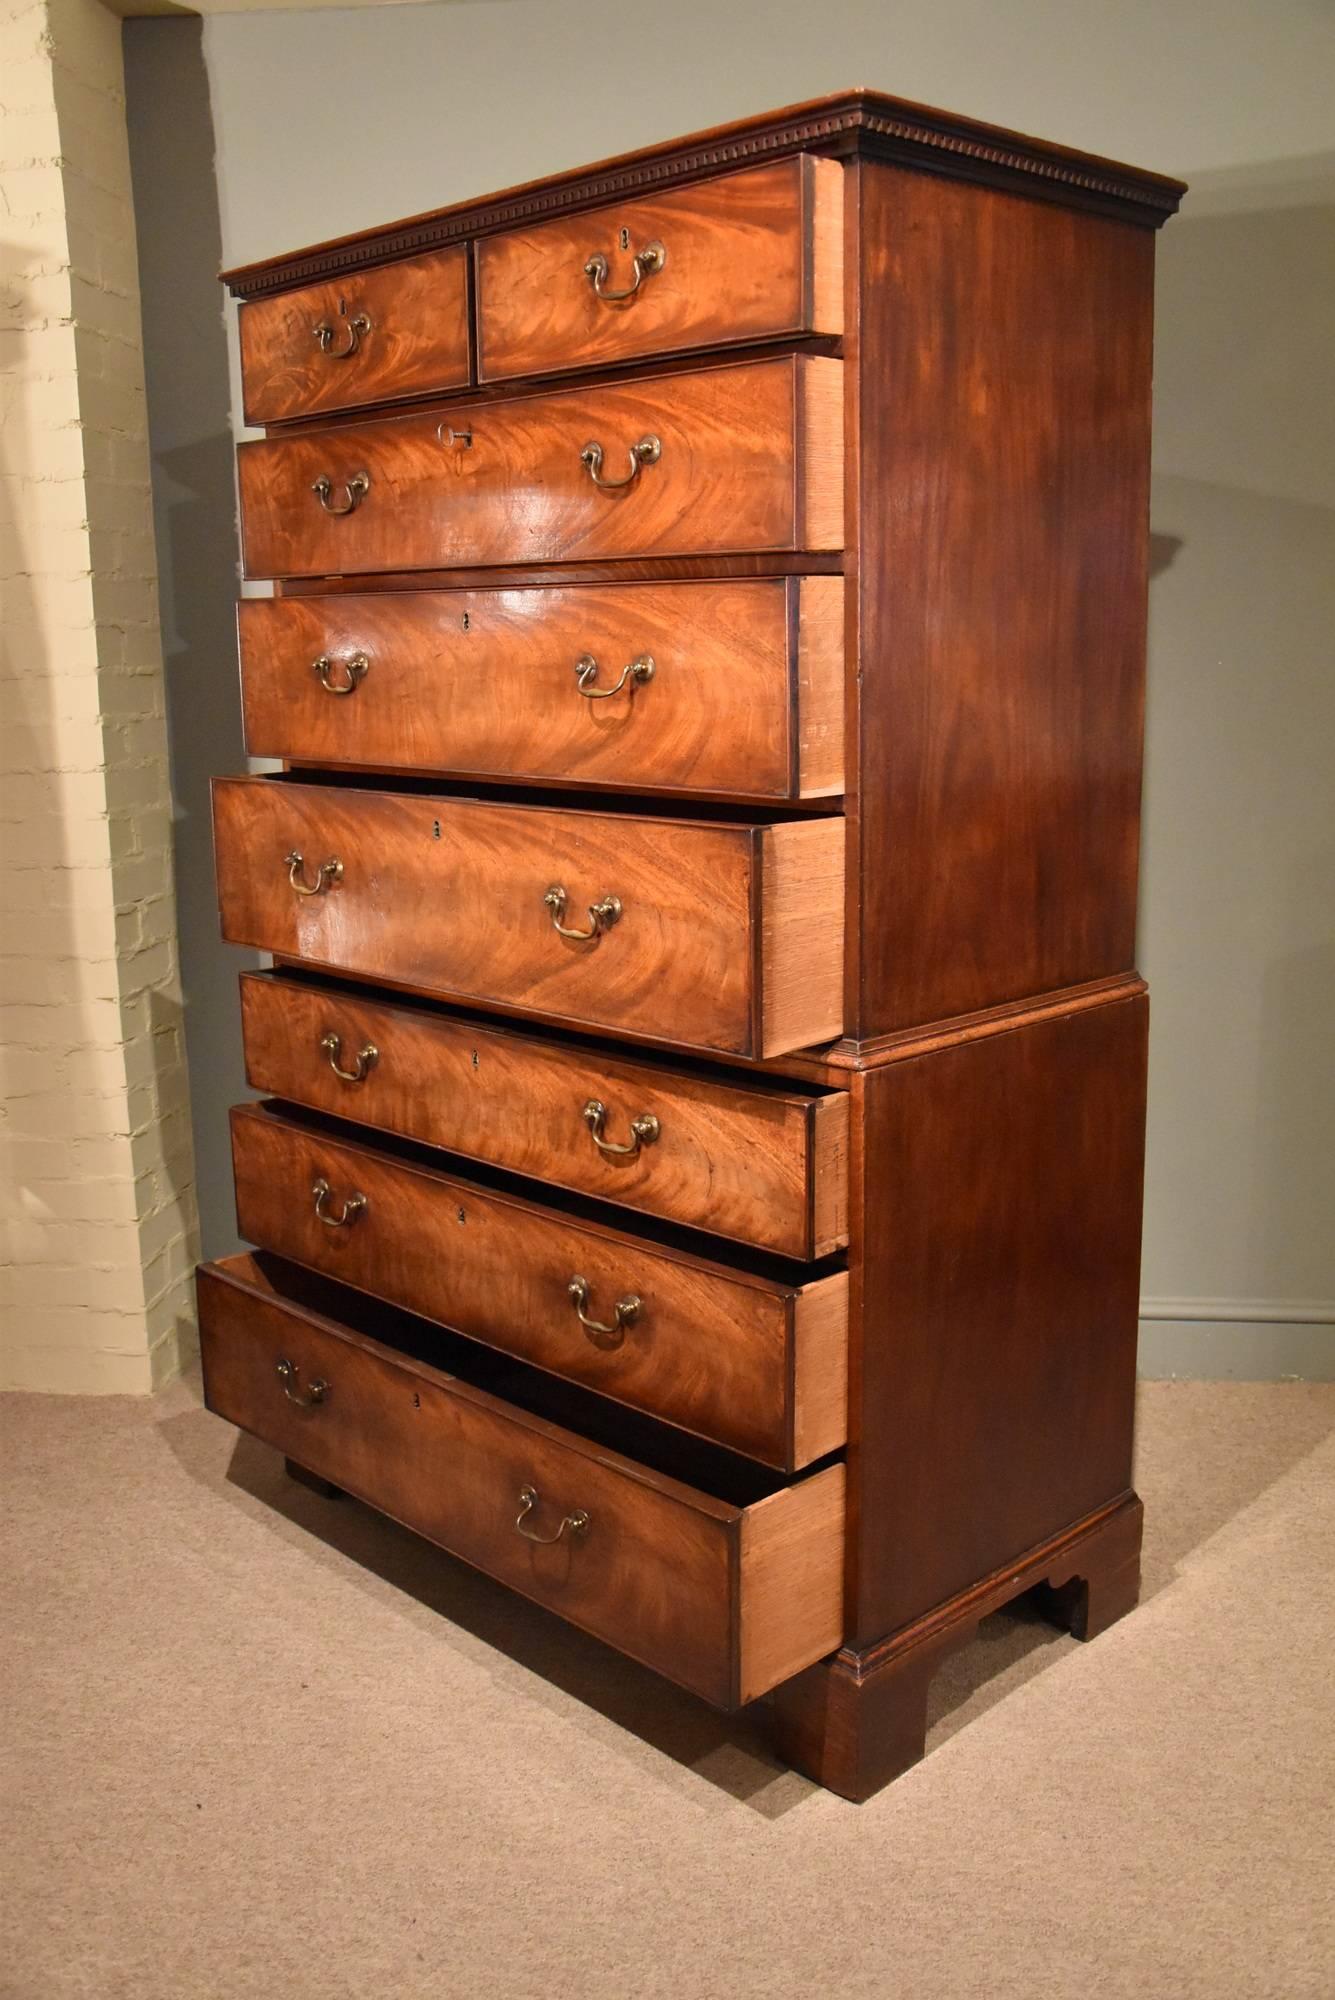 Chippendale period mahogany chest on chest in original condition 

Dimensions
Height 69.5